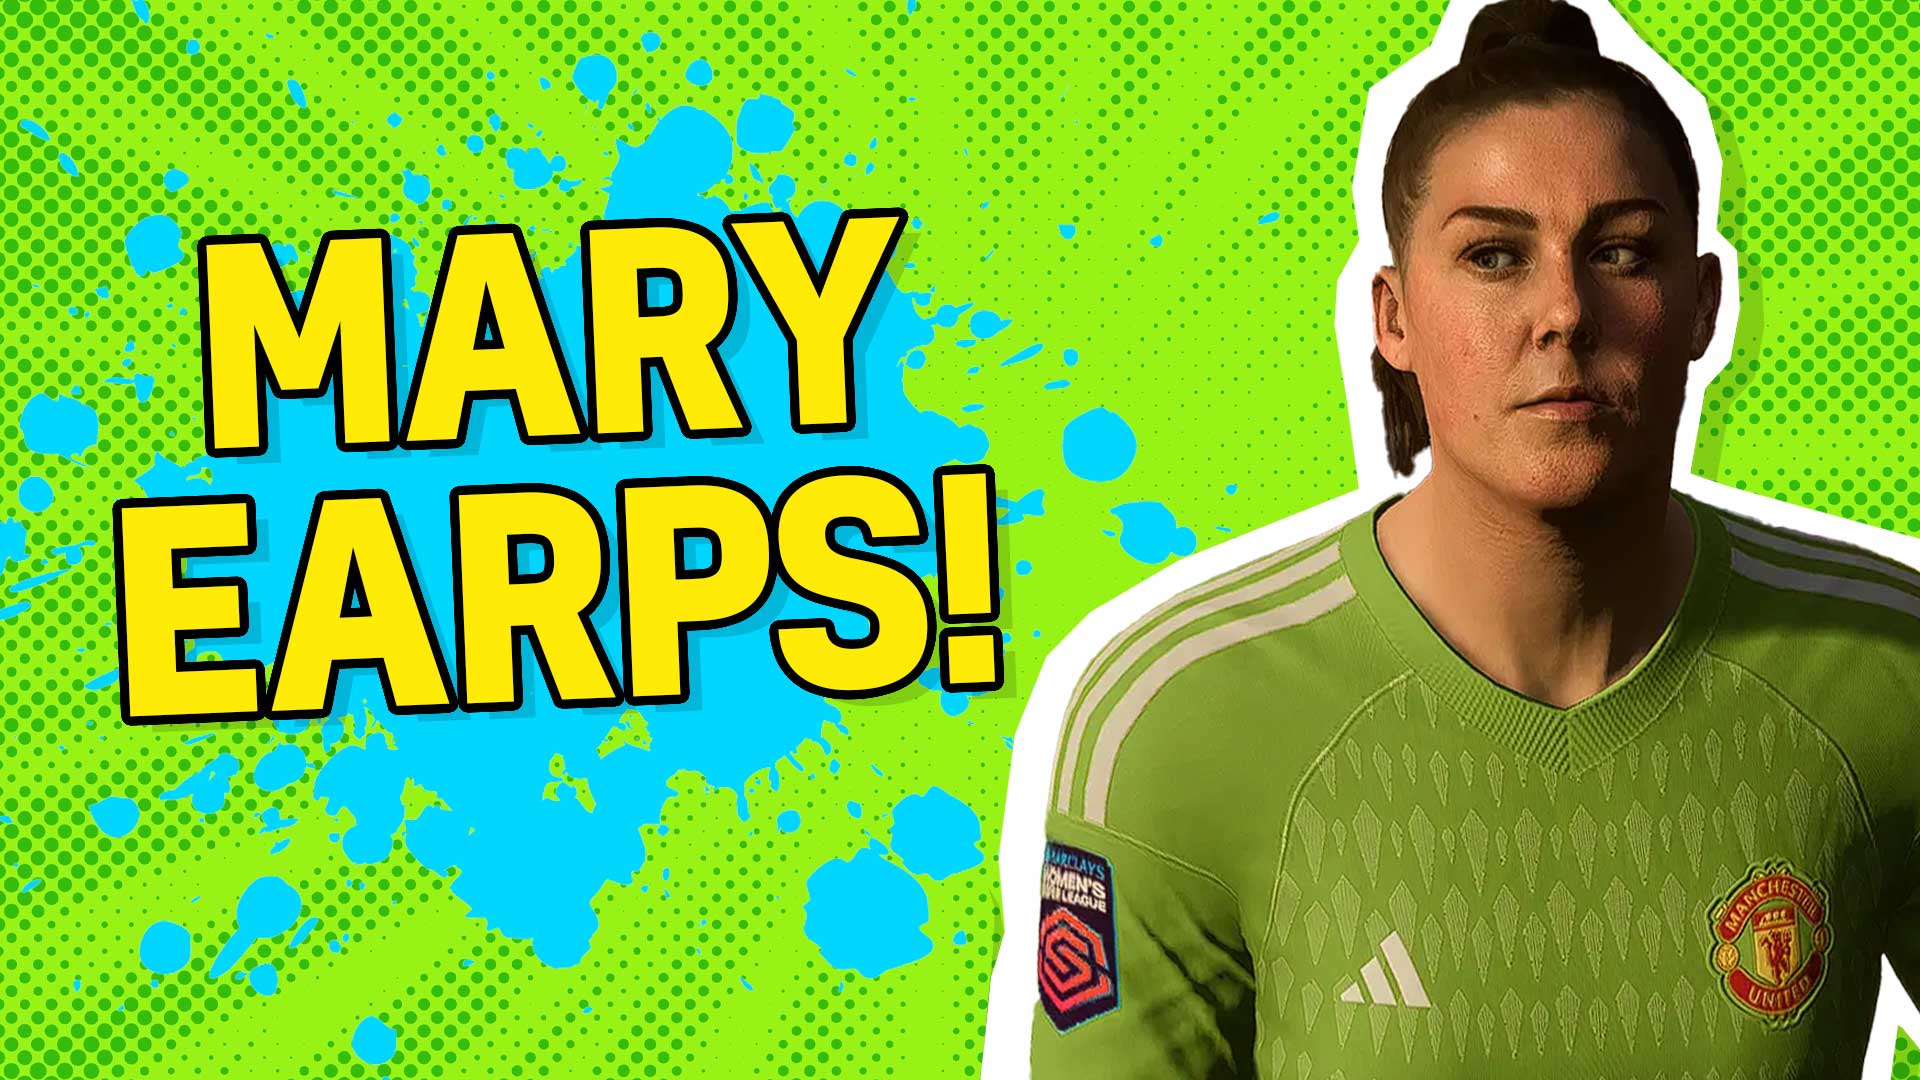 Result: Mary Earps